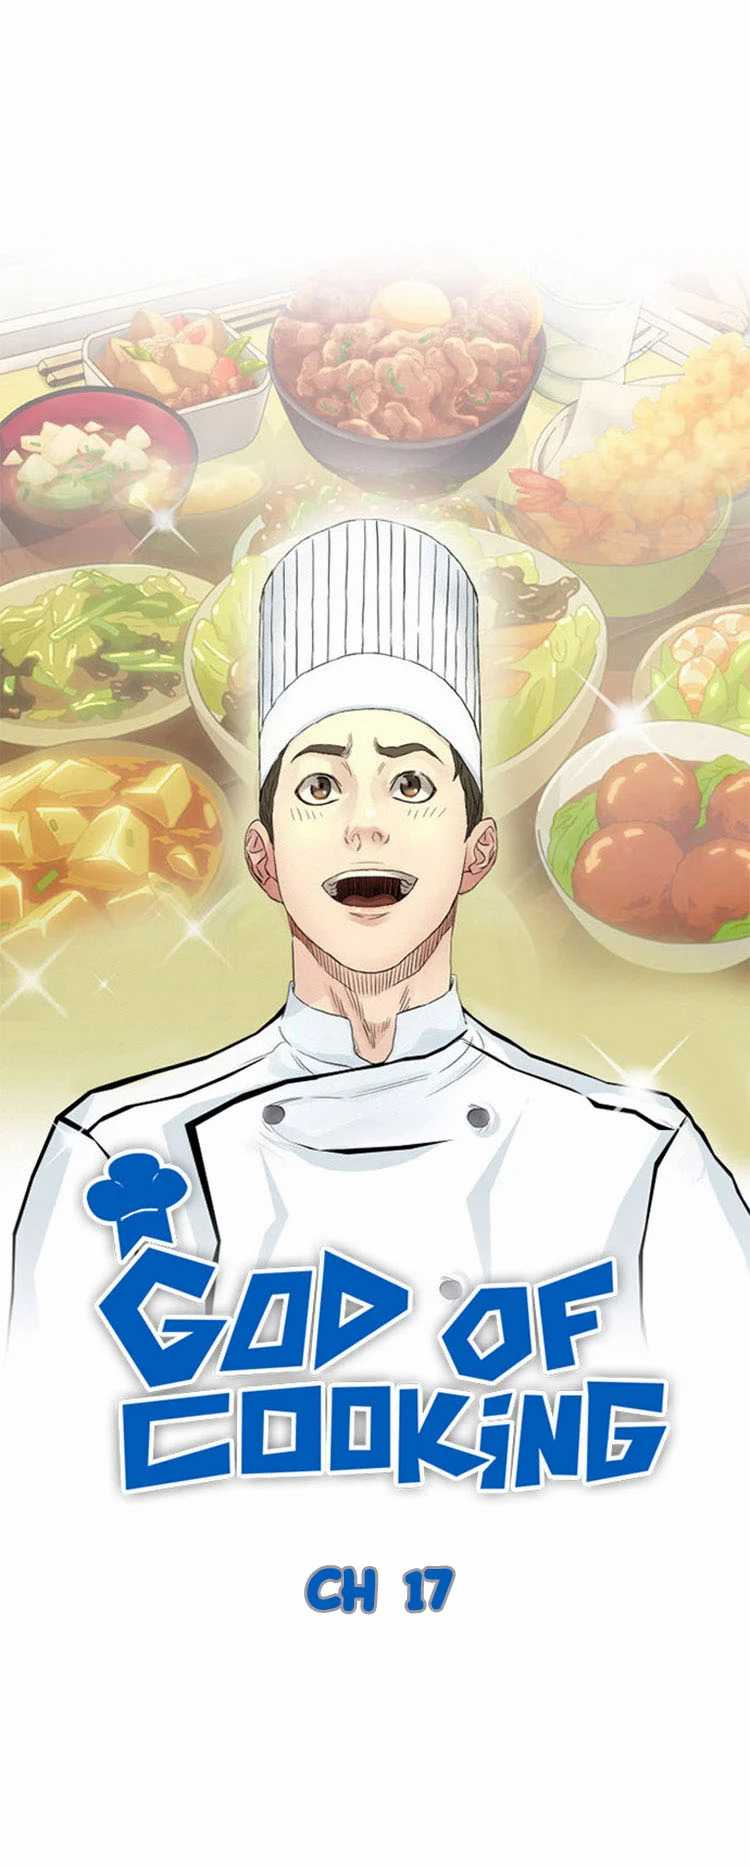 God of Cooking Chapter 17